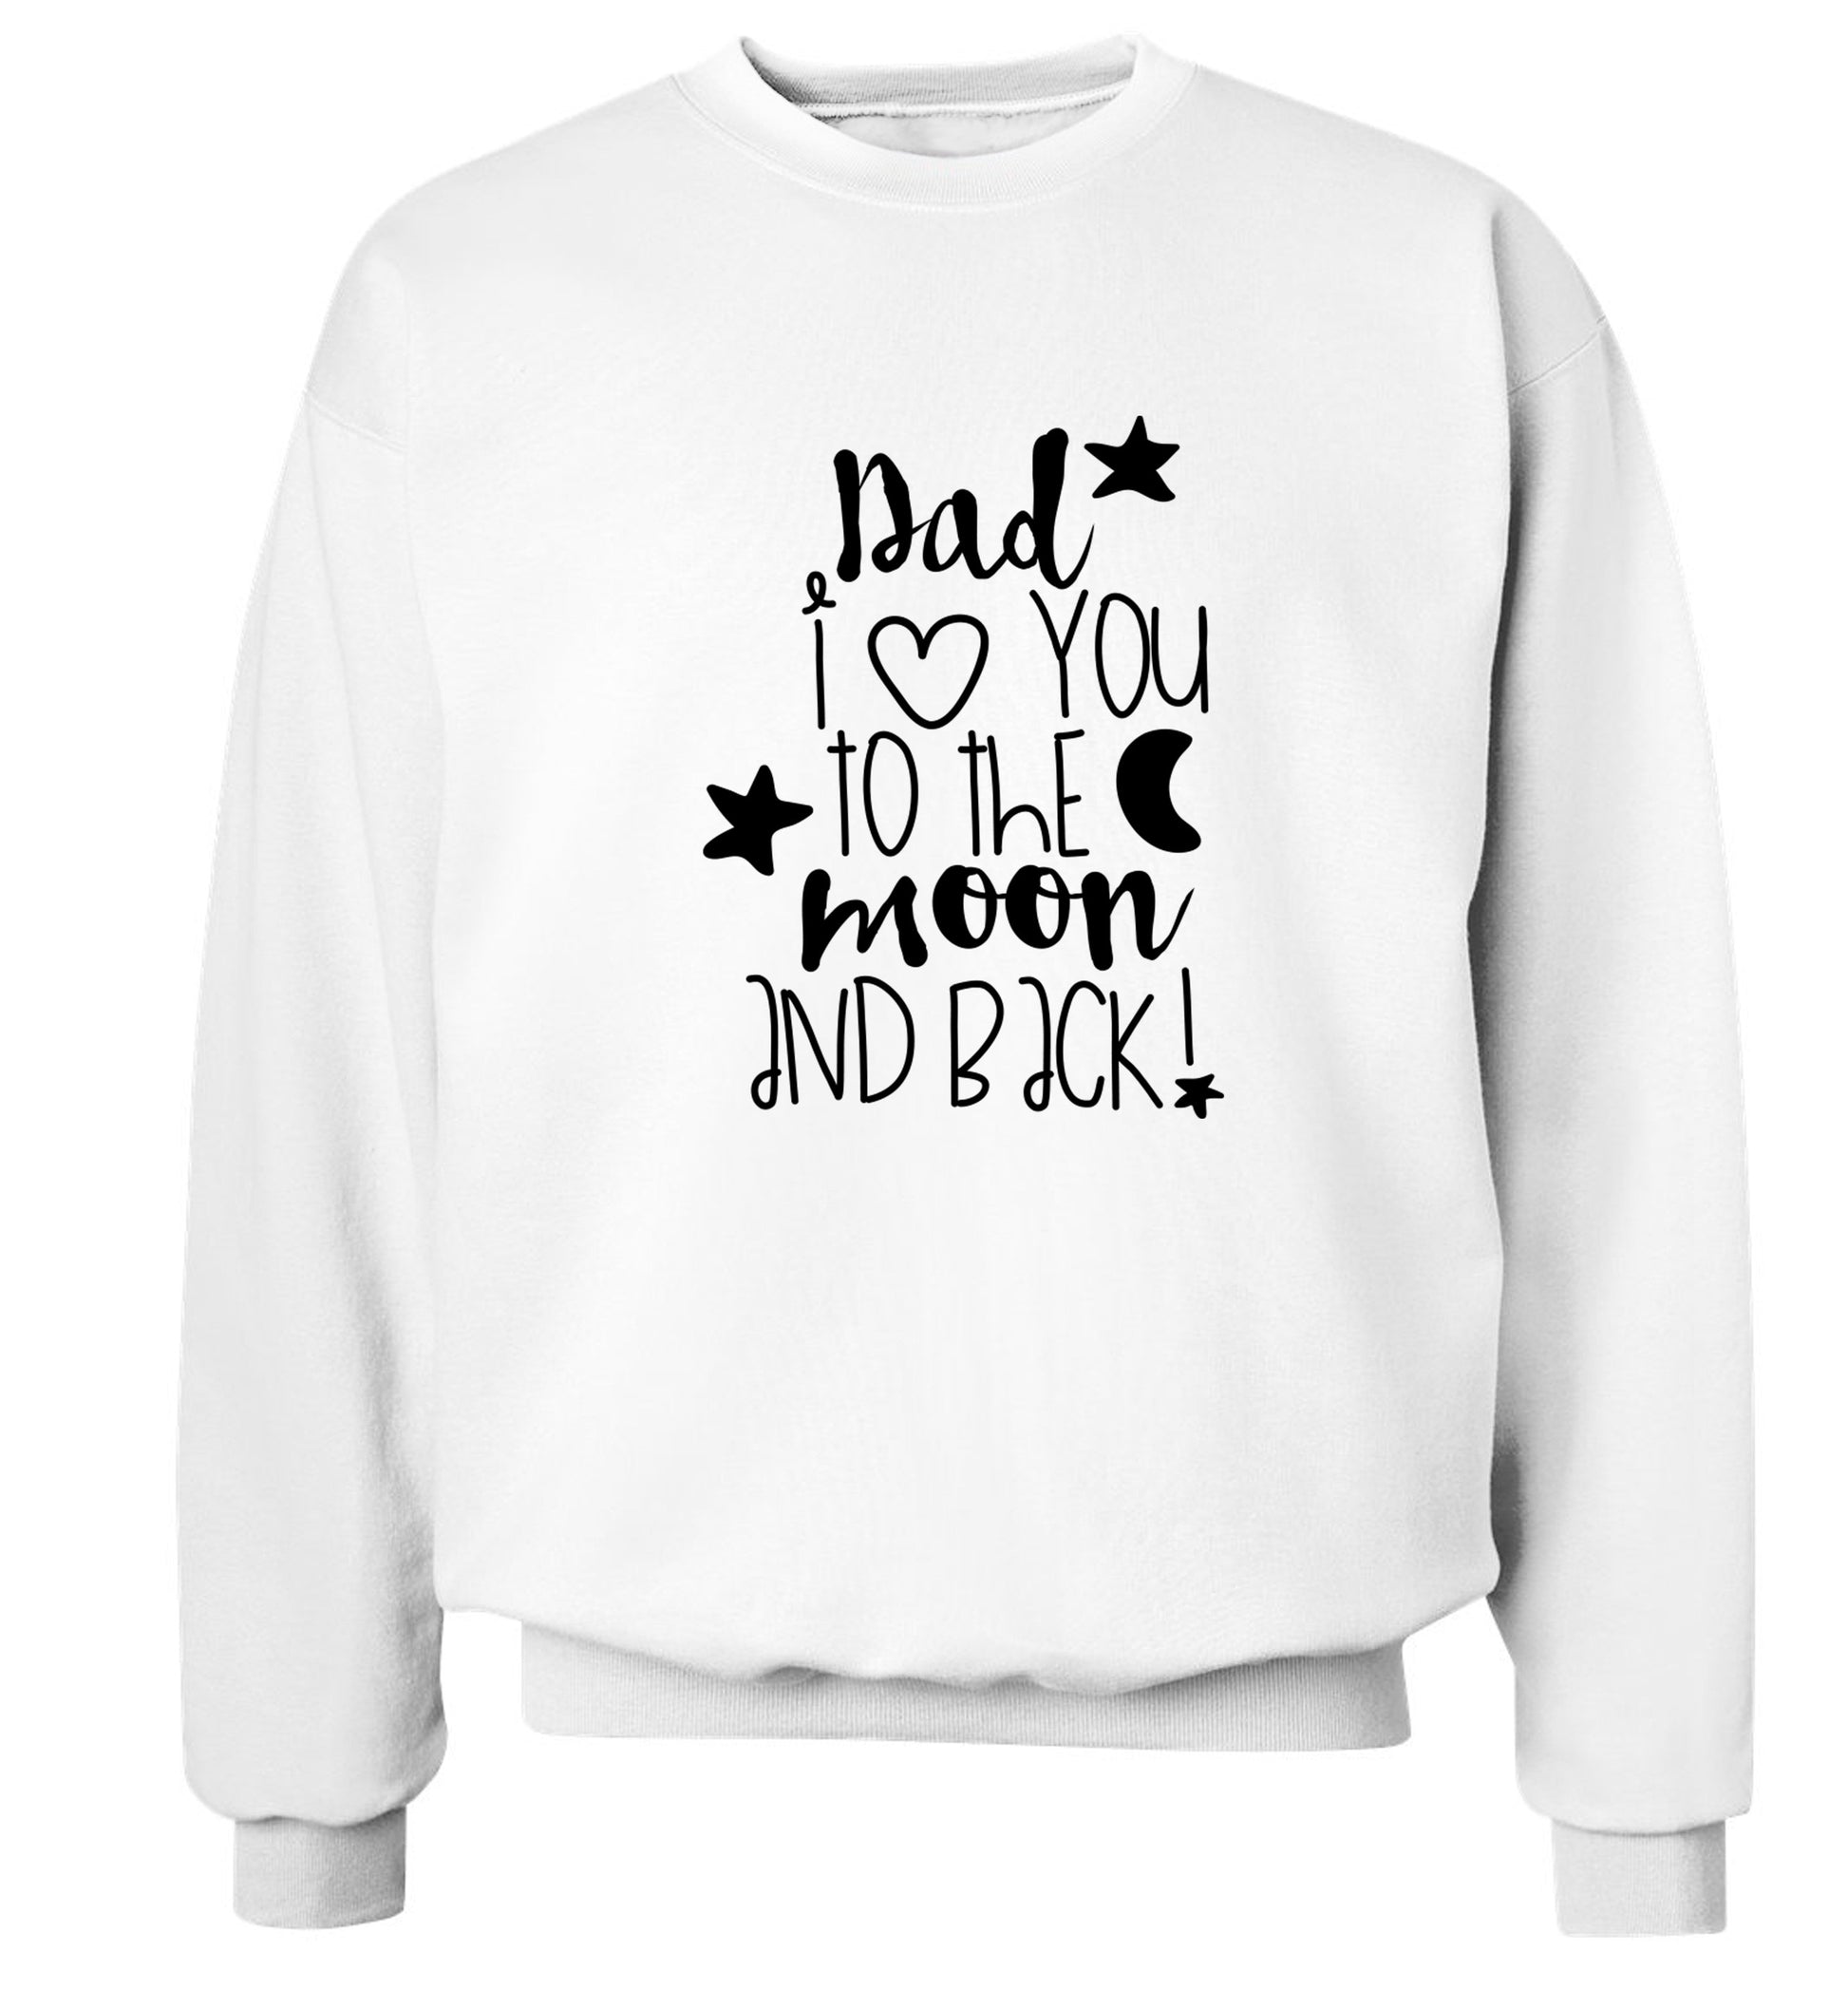 Dad I love you to the moon and back Adult's unisex white  sweater 2XL